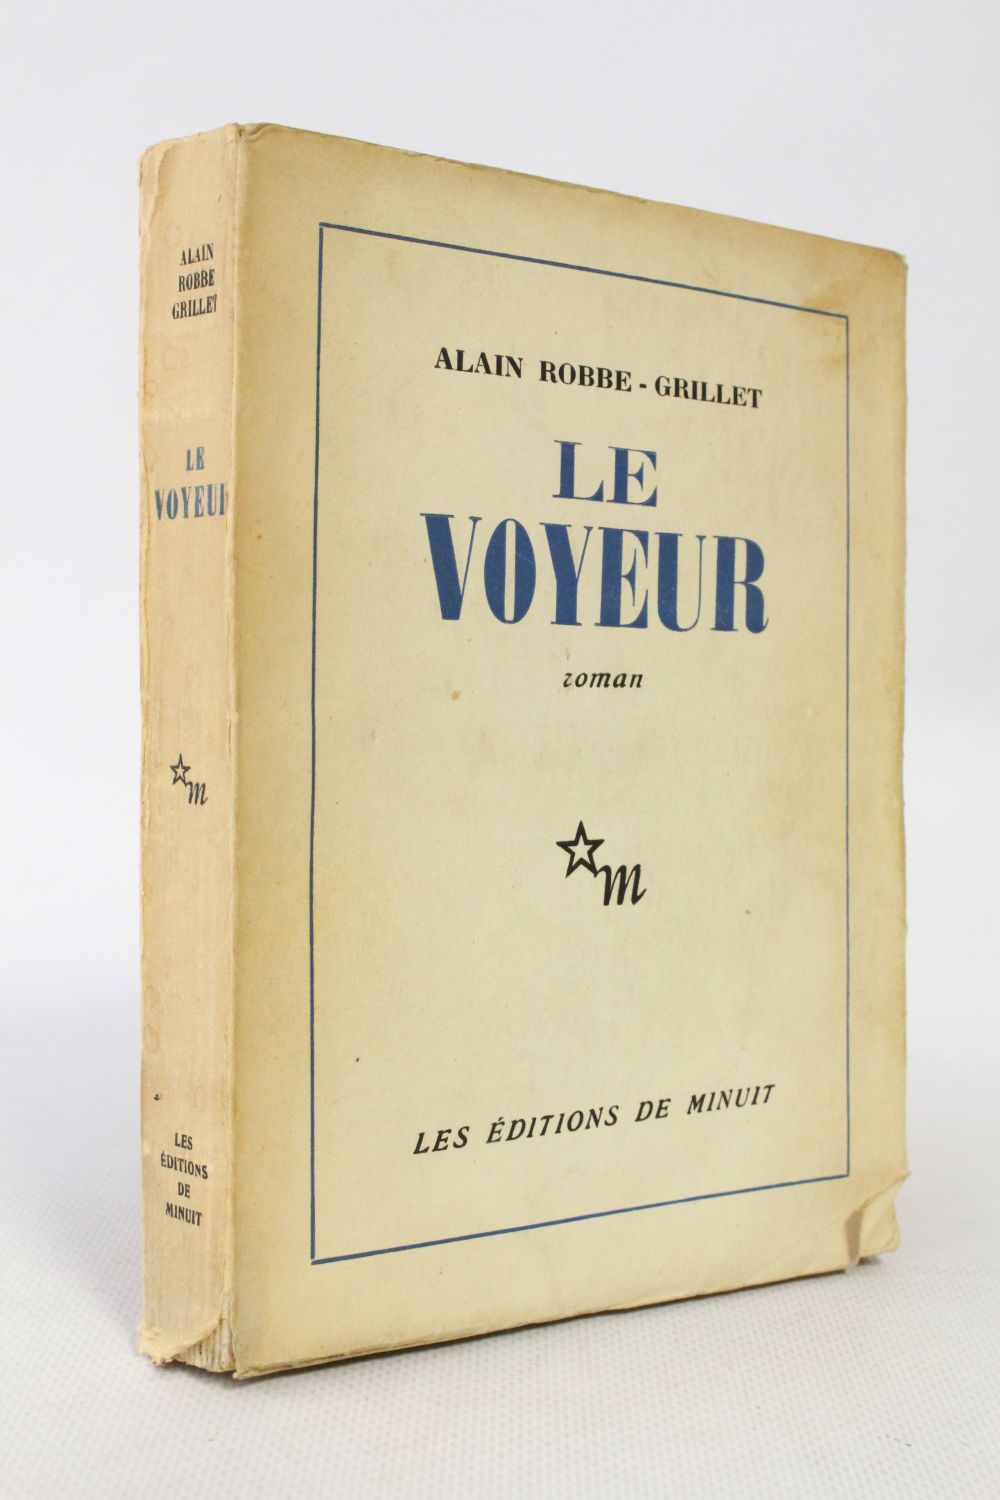 ROBBE-GRILLET Le voyeur - Signed book, First edition